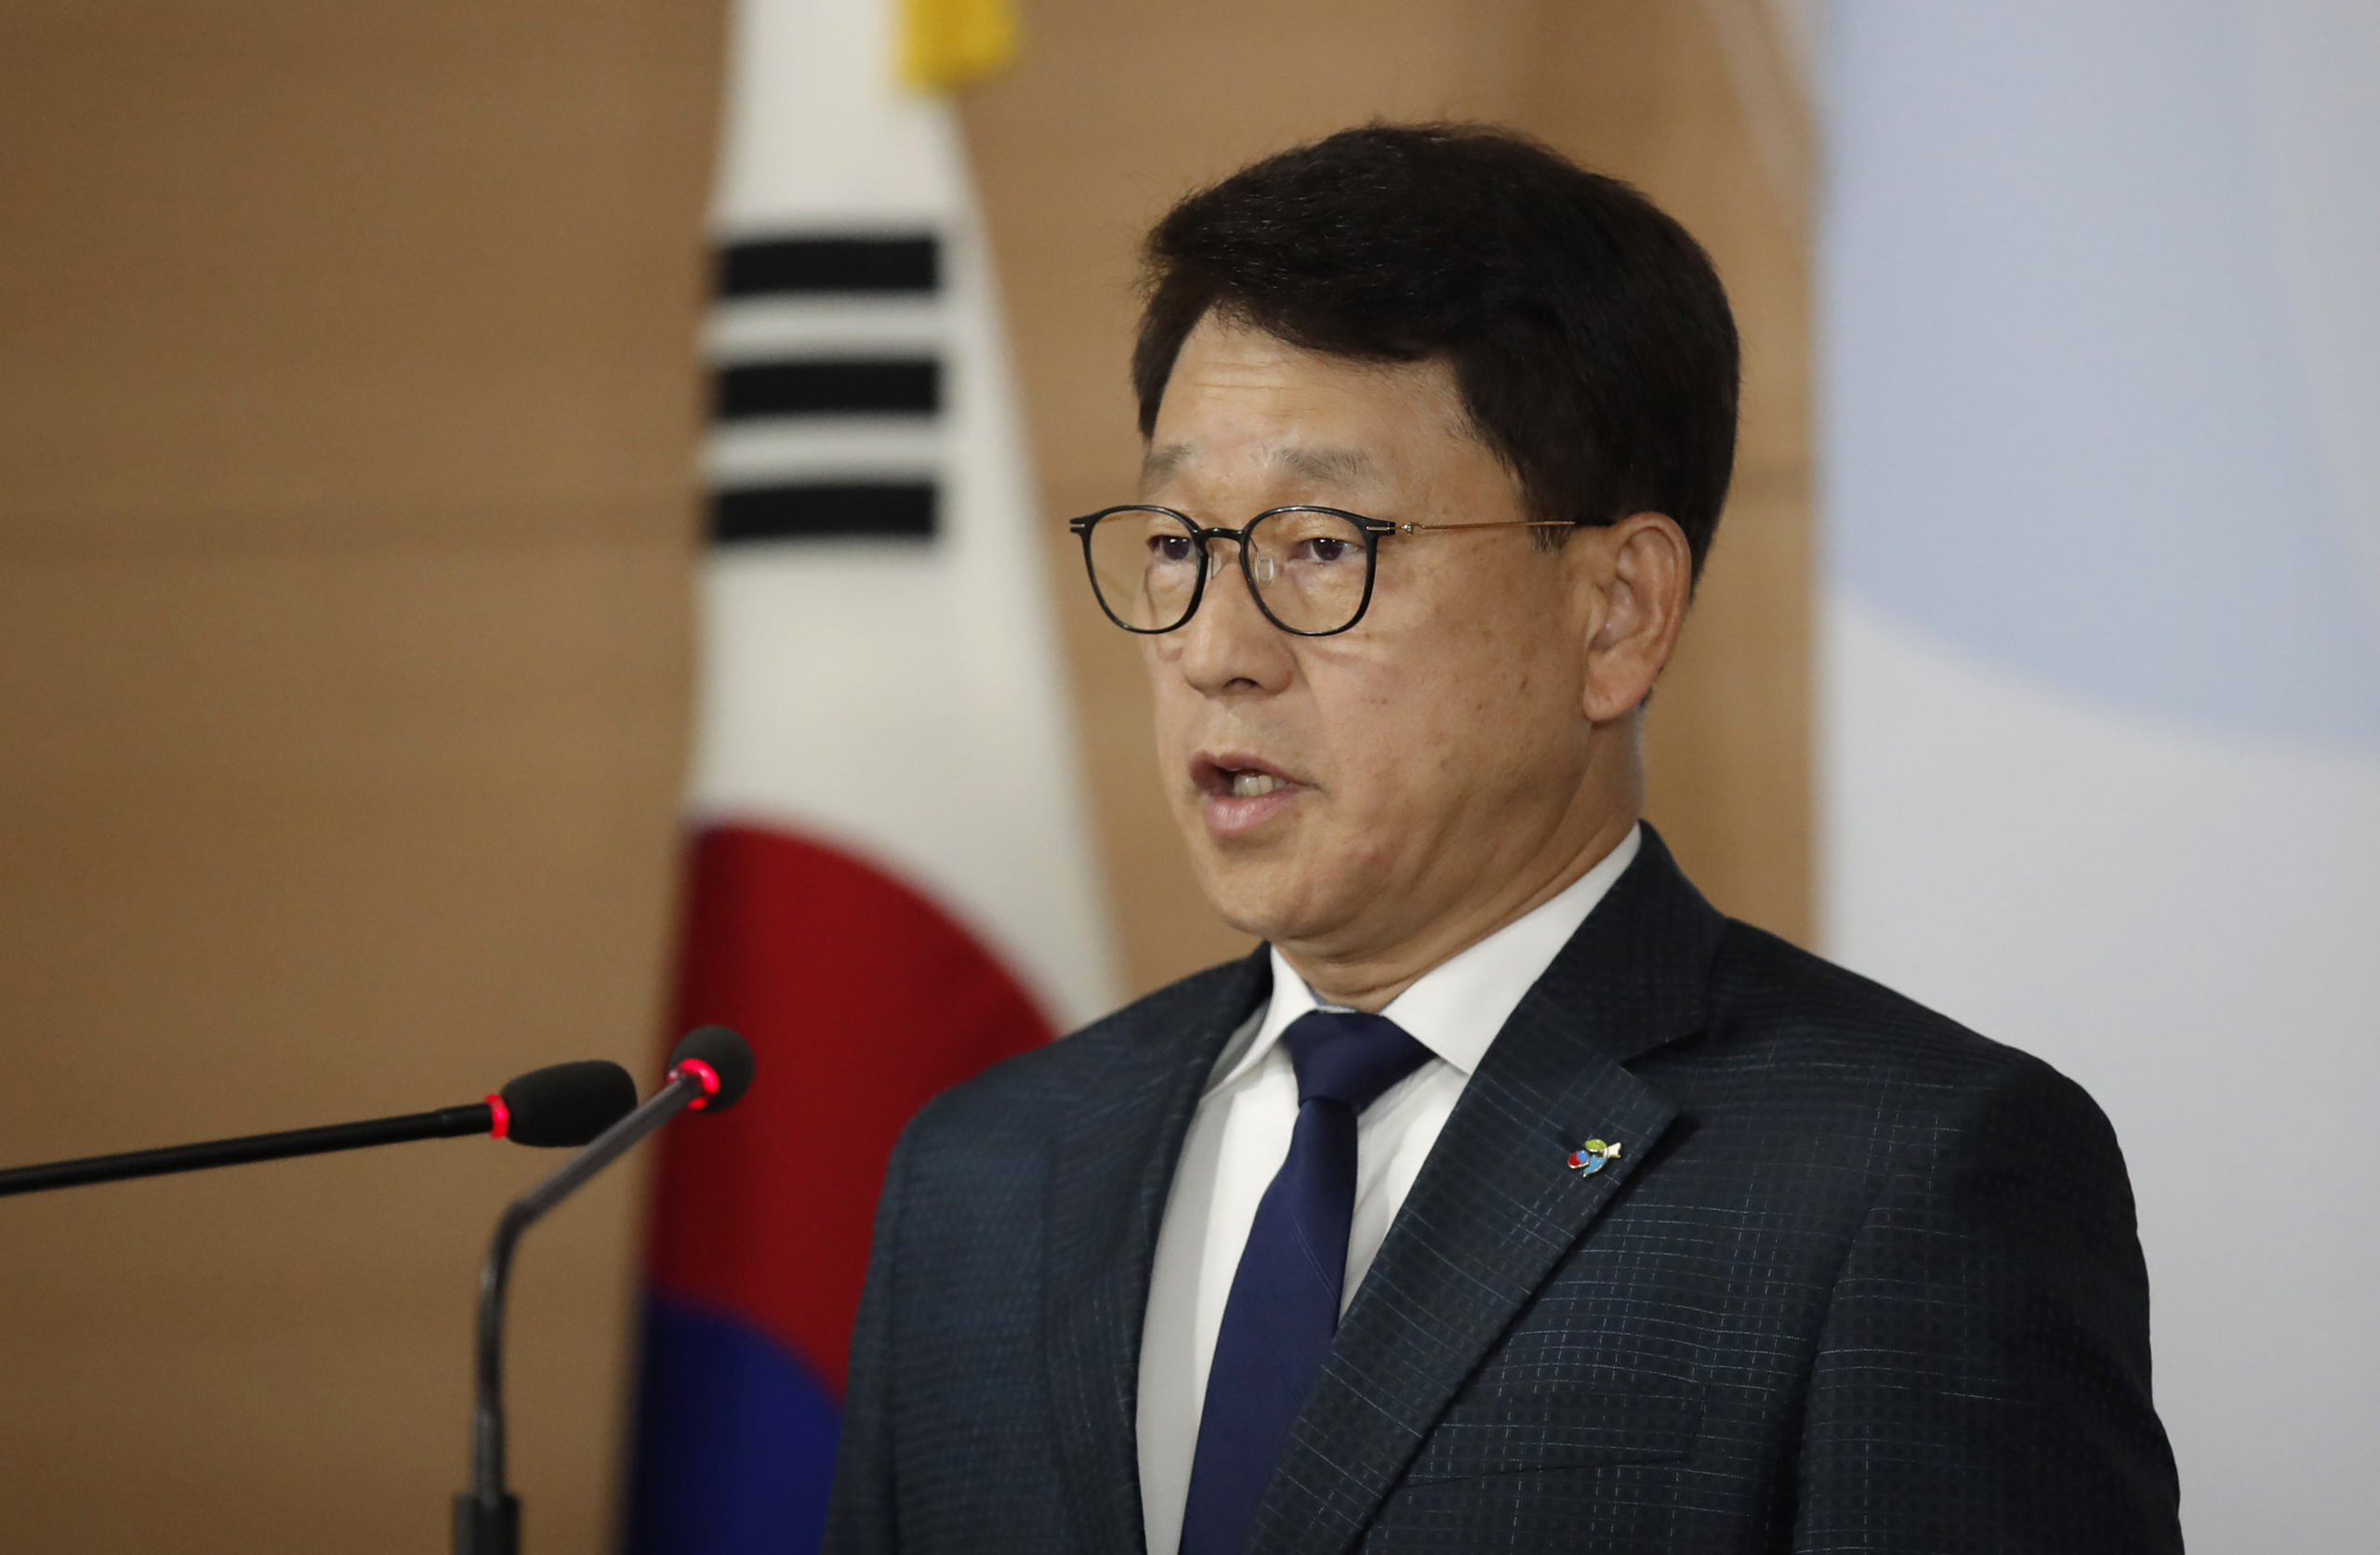 South Korea's Unification Ministry's spokesman Yoh Sang-key, speaks during a briefing at the government complex in Seoul, South Korea, Wednesday, June 10, 2020. South Korea’s government on Wednesday said it will sue two activist groups that have sent anti-Pyongyang leaflets and plastic bottles filled with rice to the North for allegedly creating tensions between the rivals. (AP Photo/Lee Jin-man)